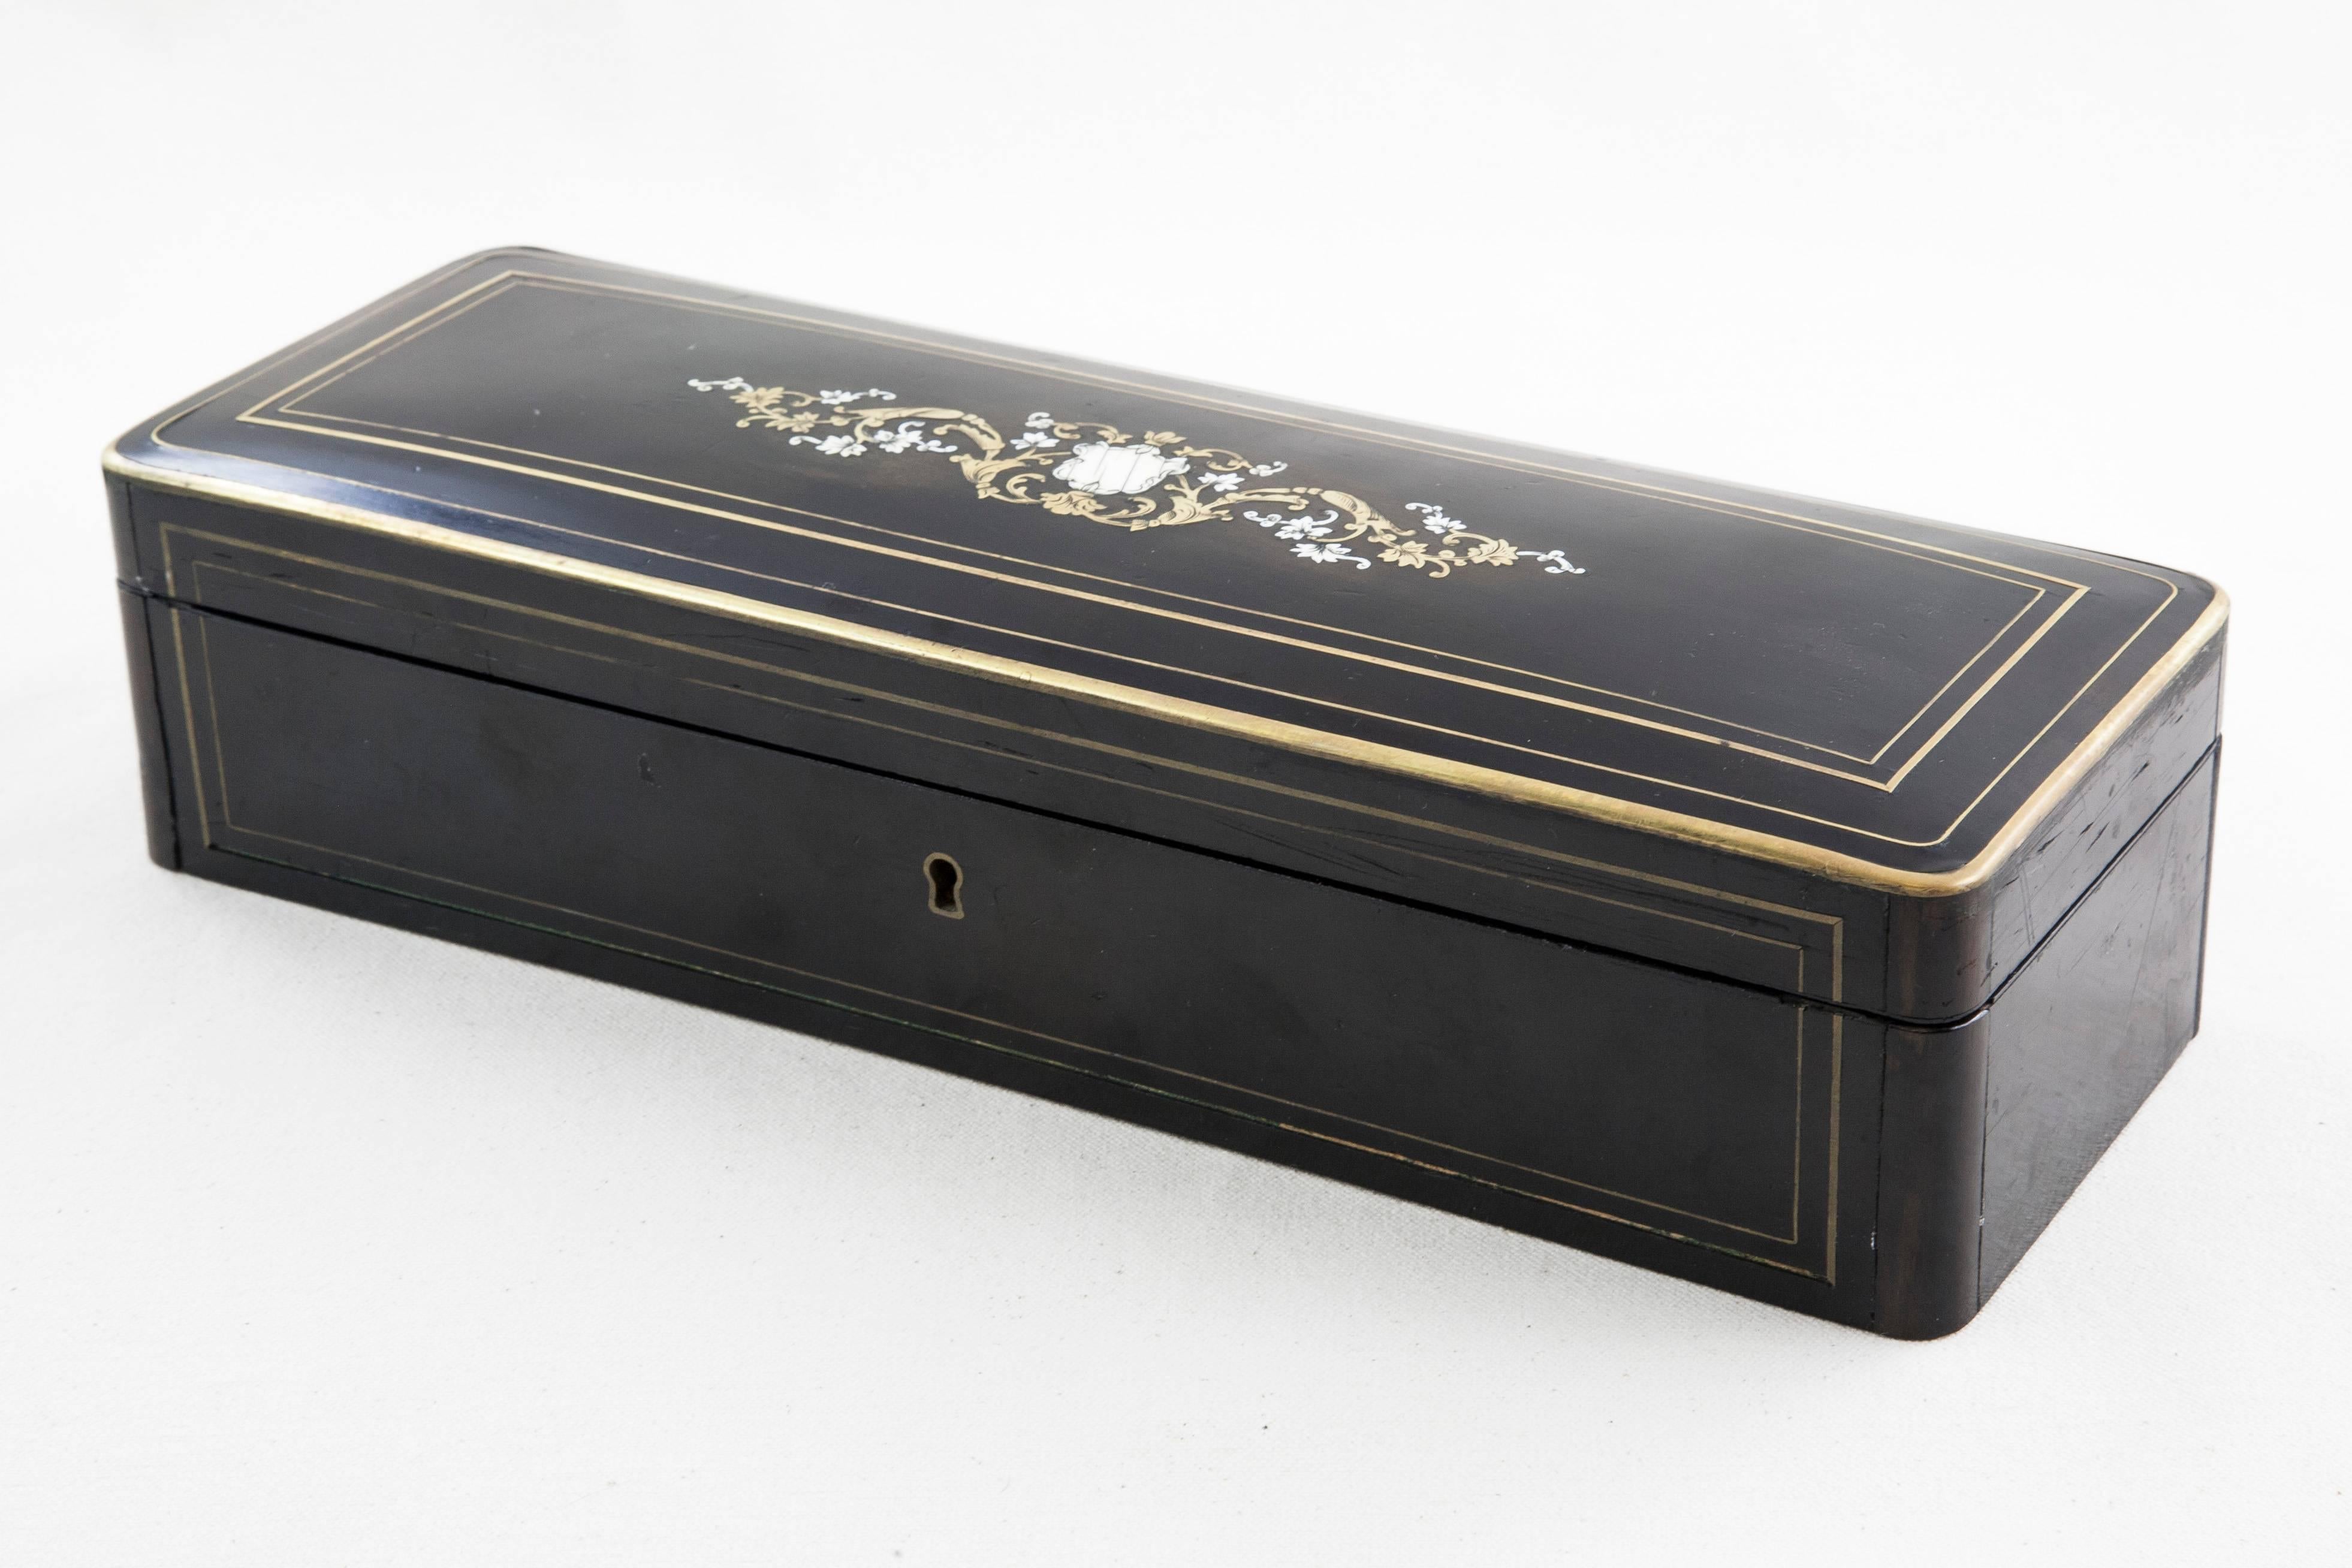 This 19th century Napoleon III period black lacquer jewelry box features an intricate bronze and bone inlaid cartouche on the lid flanked by gadrooning leaves and flowers. Bronze trim lines the top and outer edges of the lid, and a tufted red satin